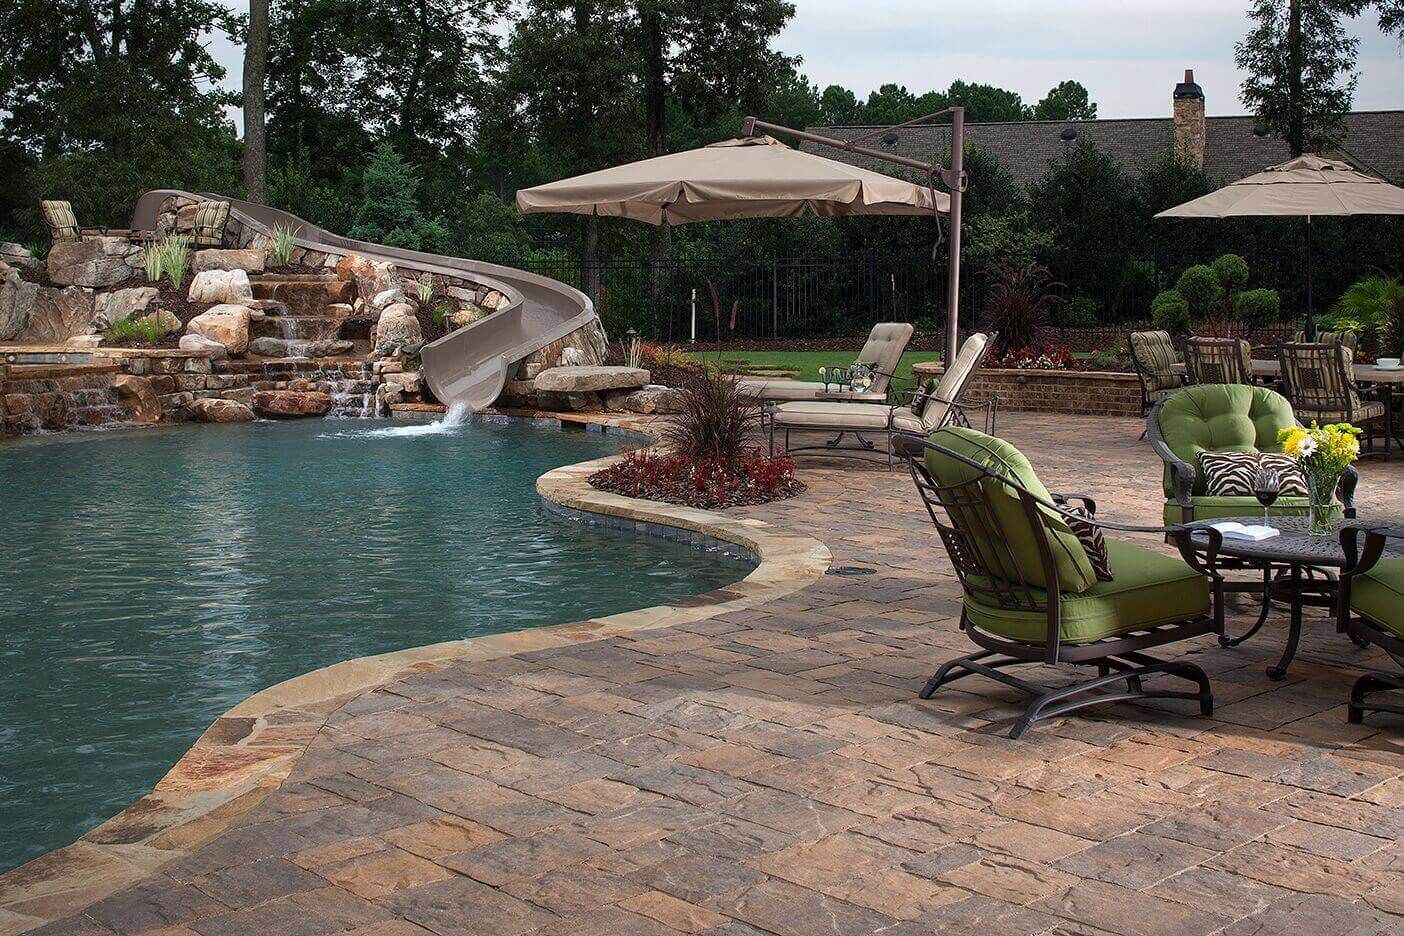 New pool build with slide and paver patio pool deck design idea The Woodlands Texas